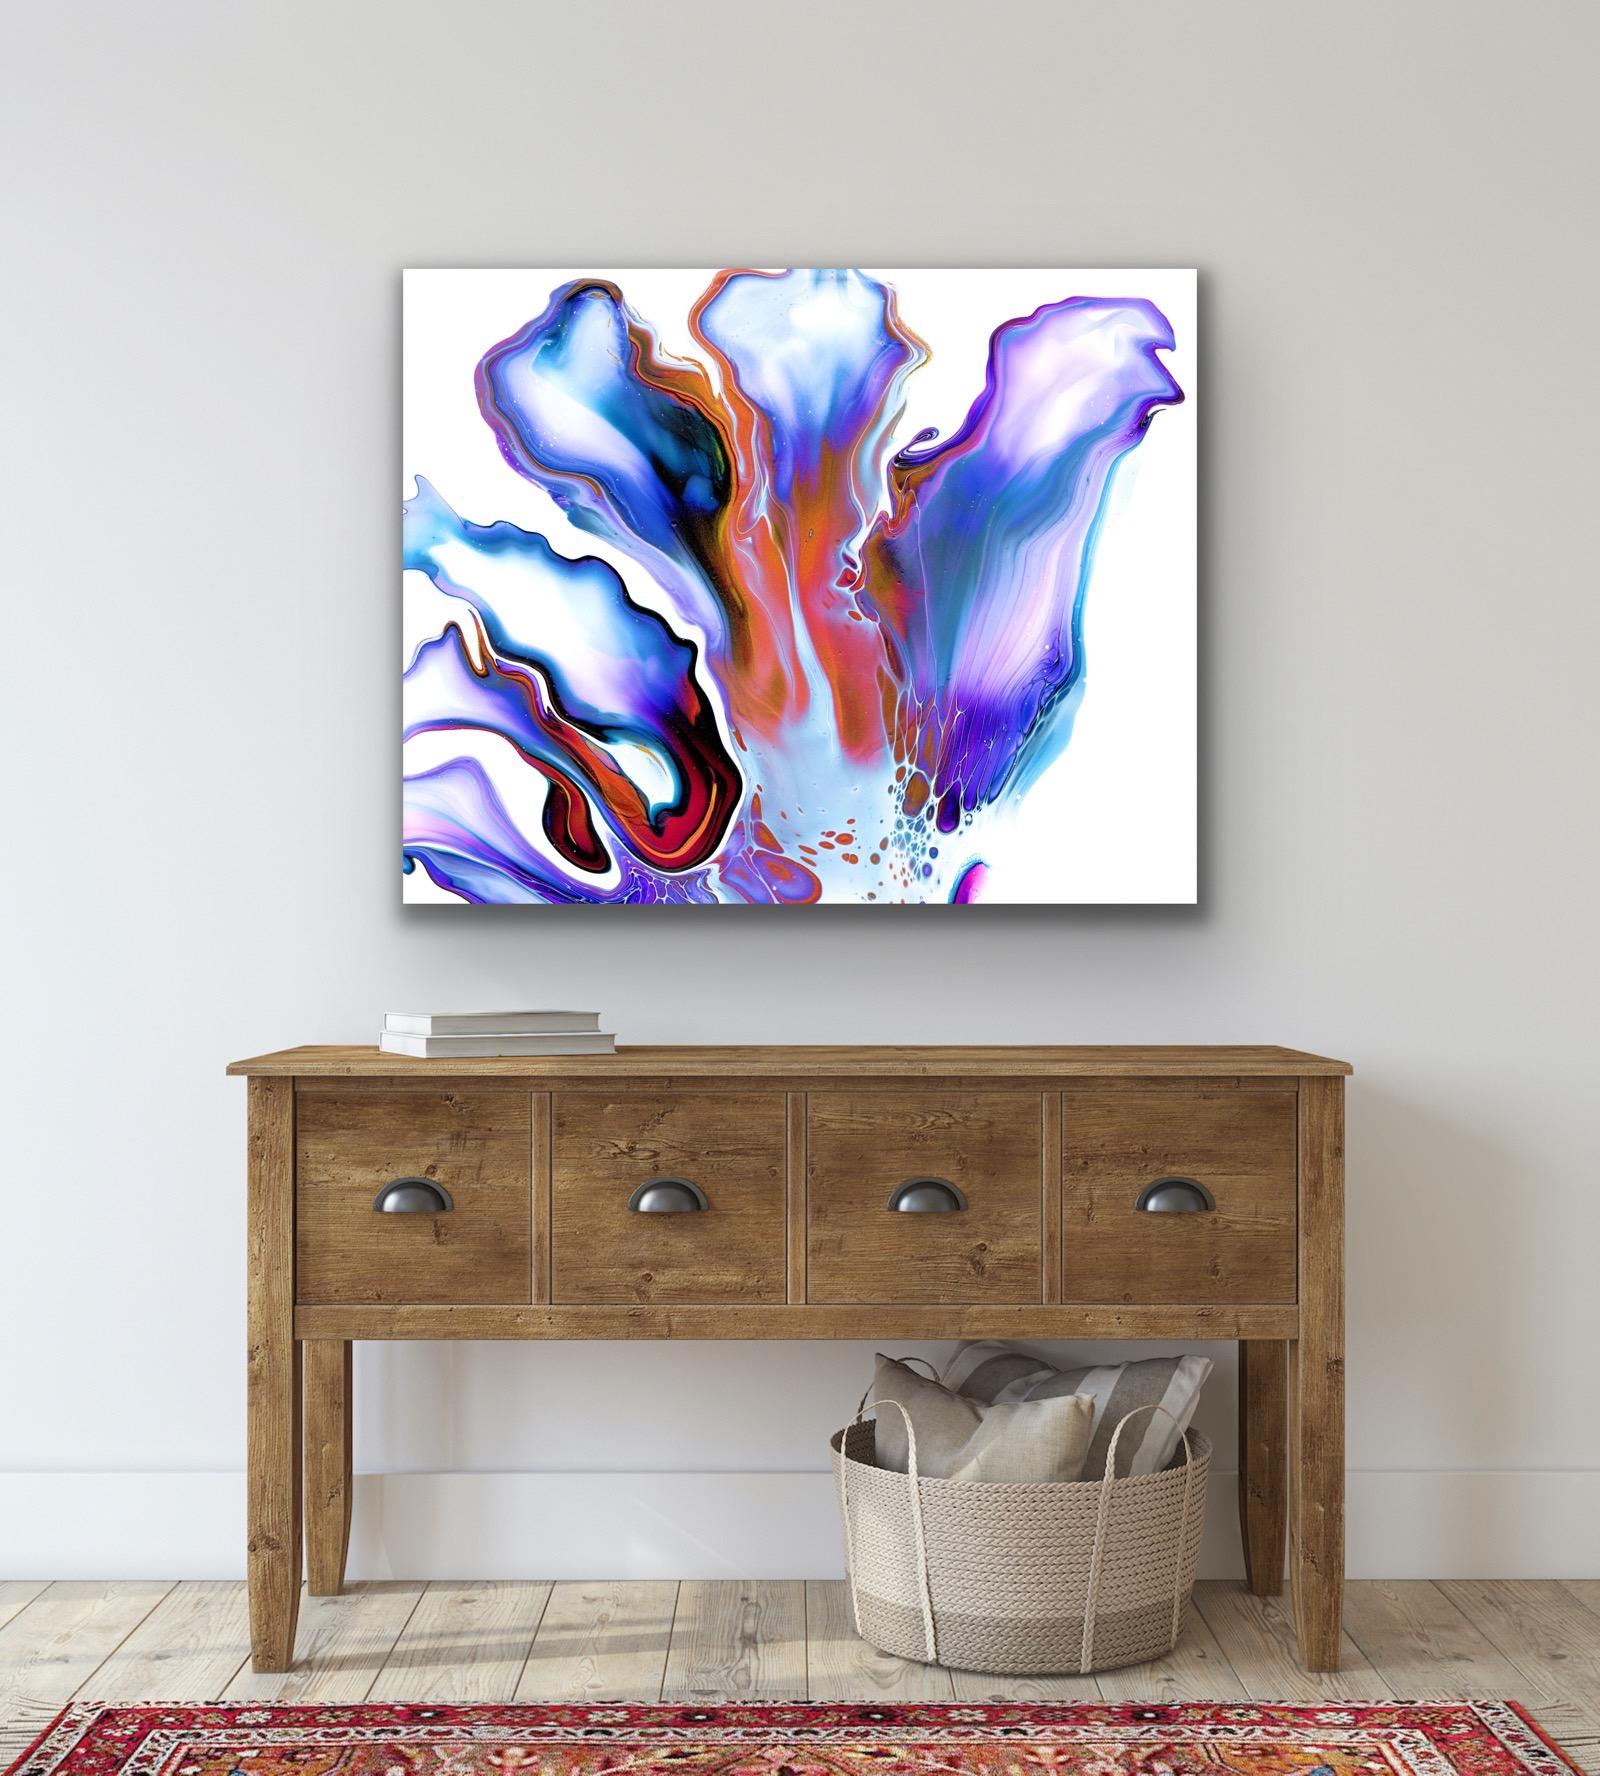 Abstract Contemporary Fluid Art, Celeste Reiter, Signed Limited Edition Giclee’ For Sale 2